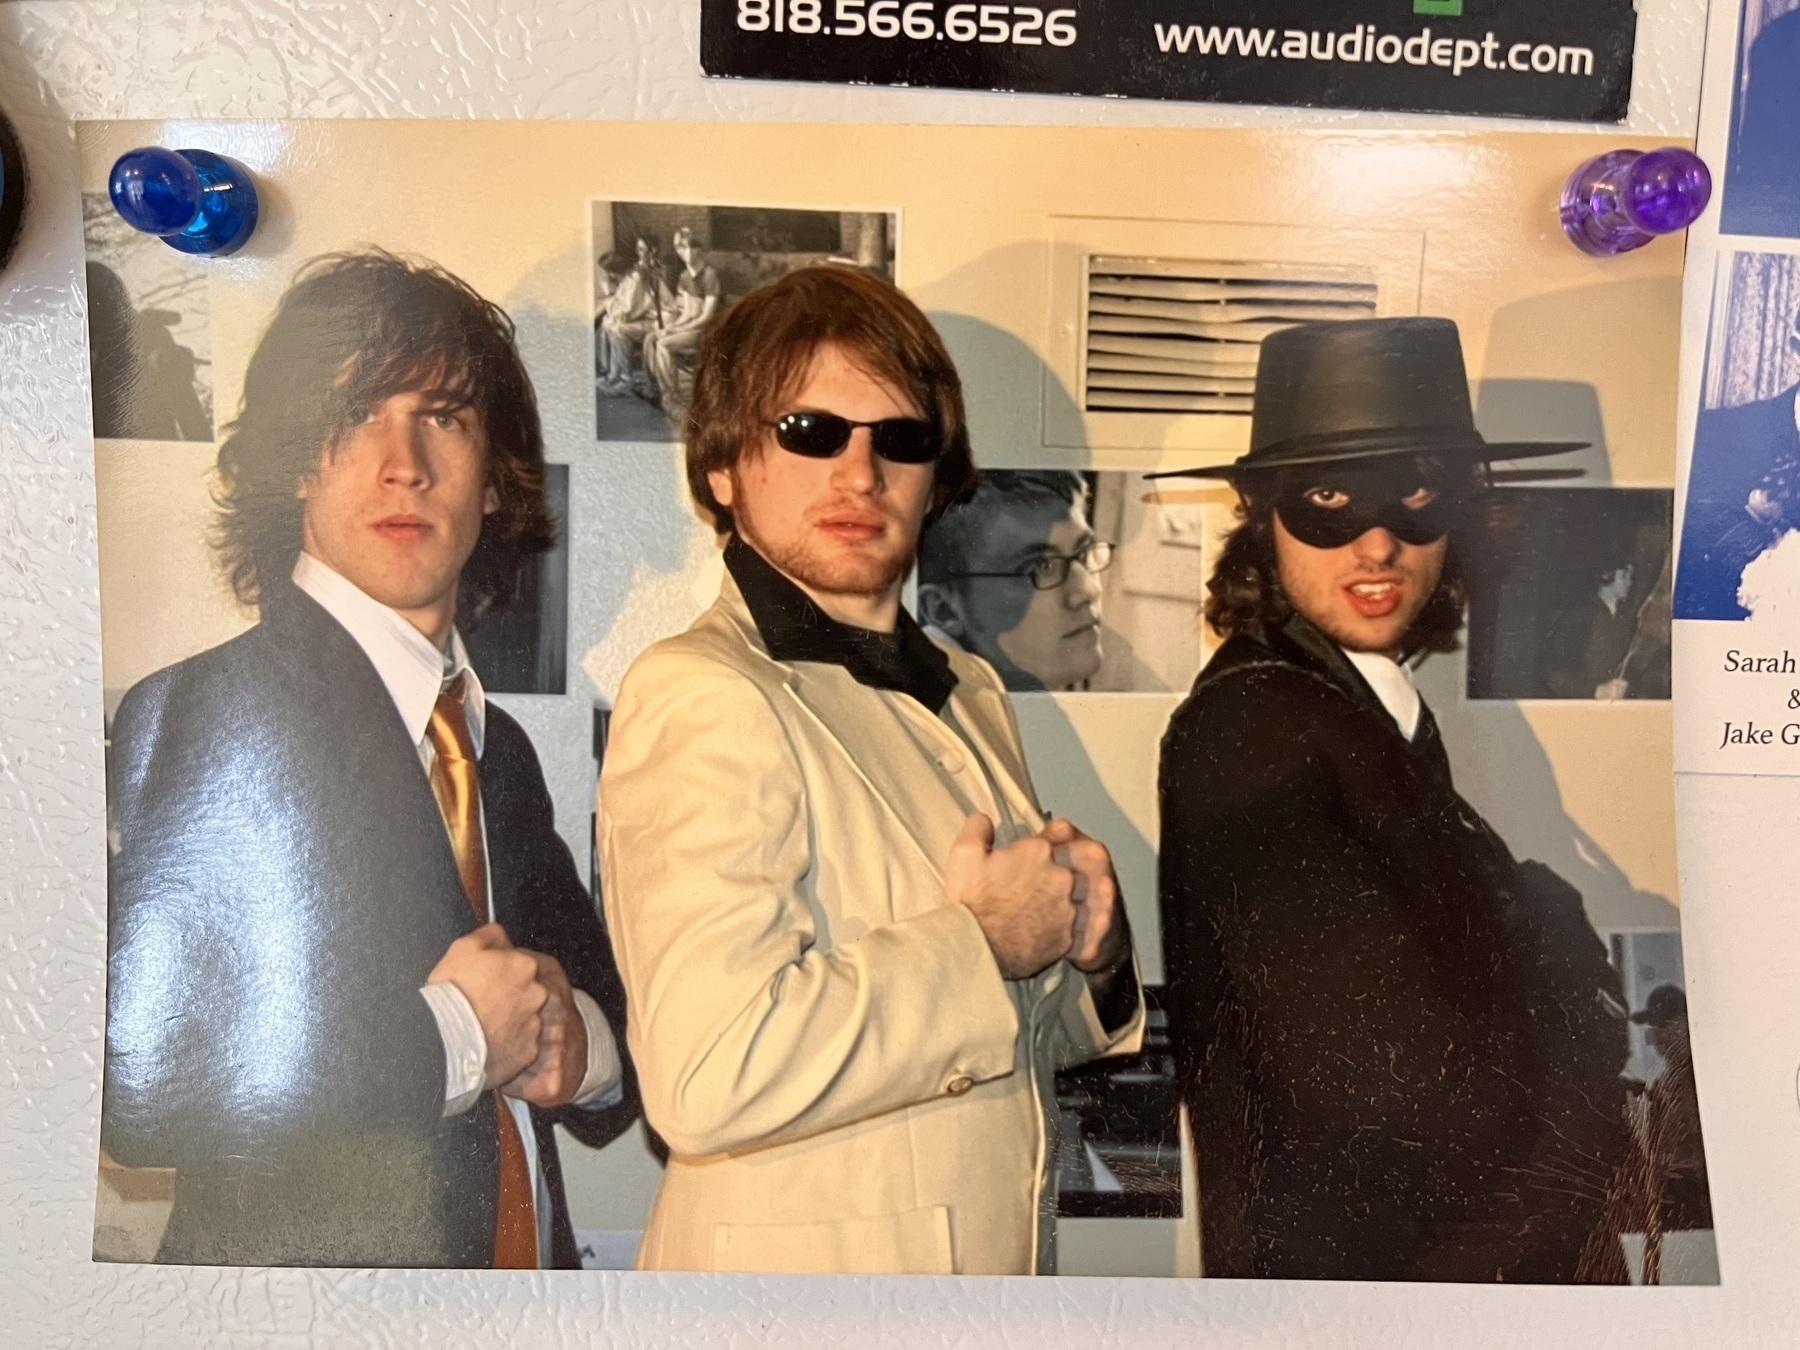 Three young white men wearing suits and serious expressions. Me, on the right, is wearing an eye mask and hat and a sneer. 